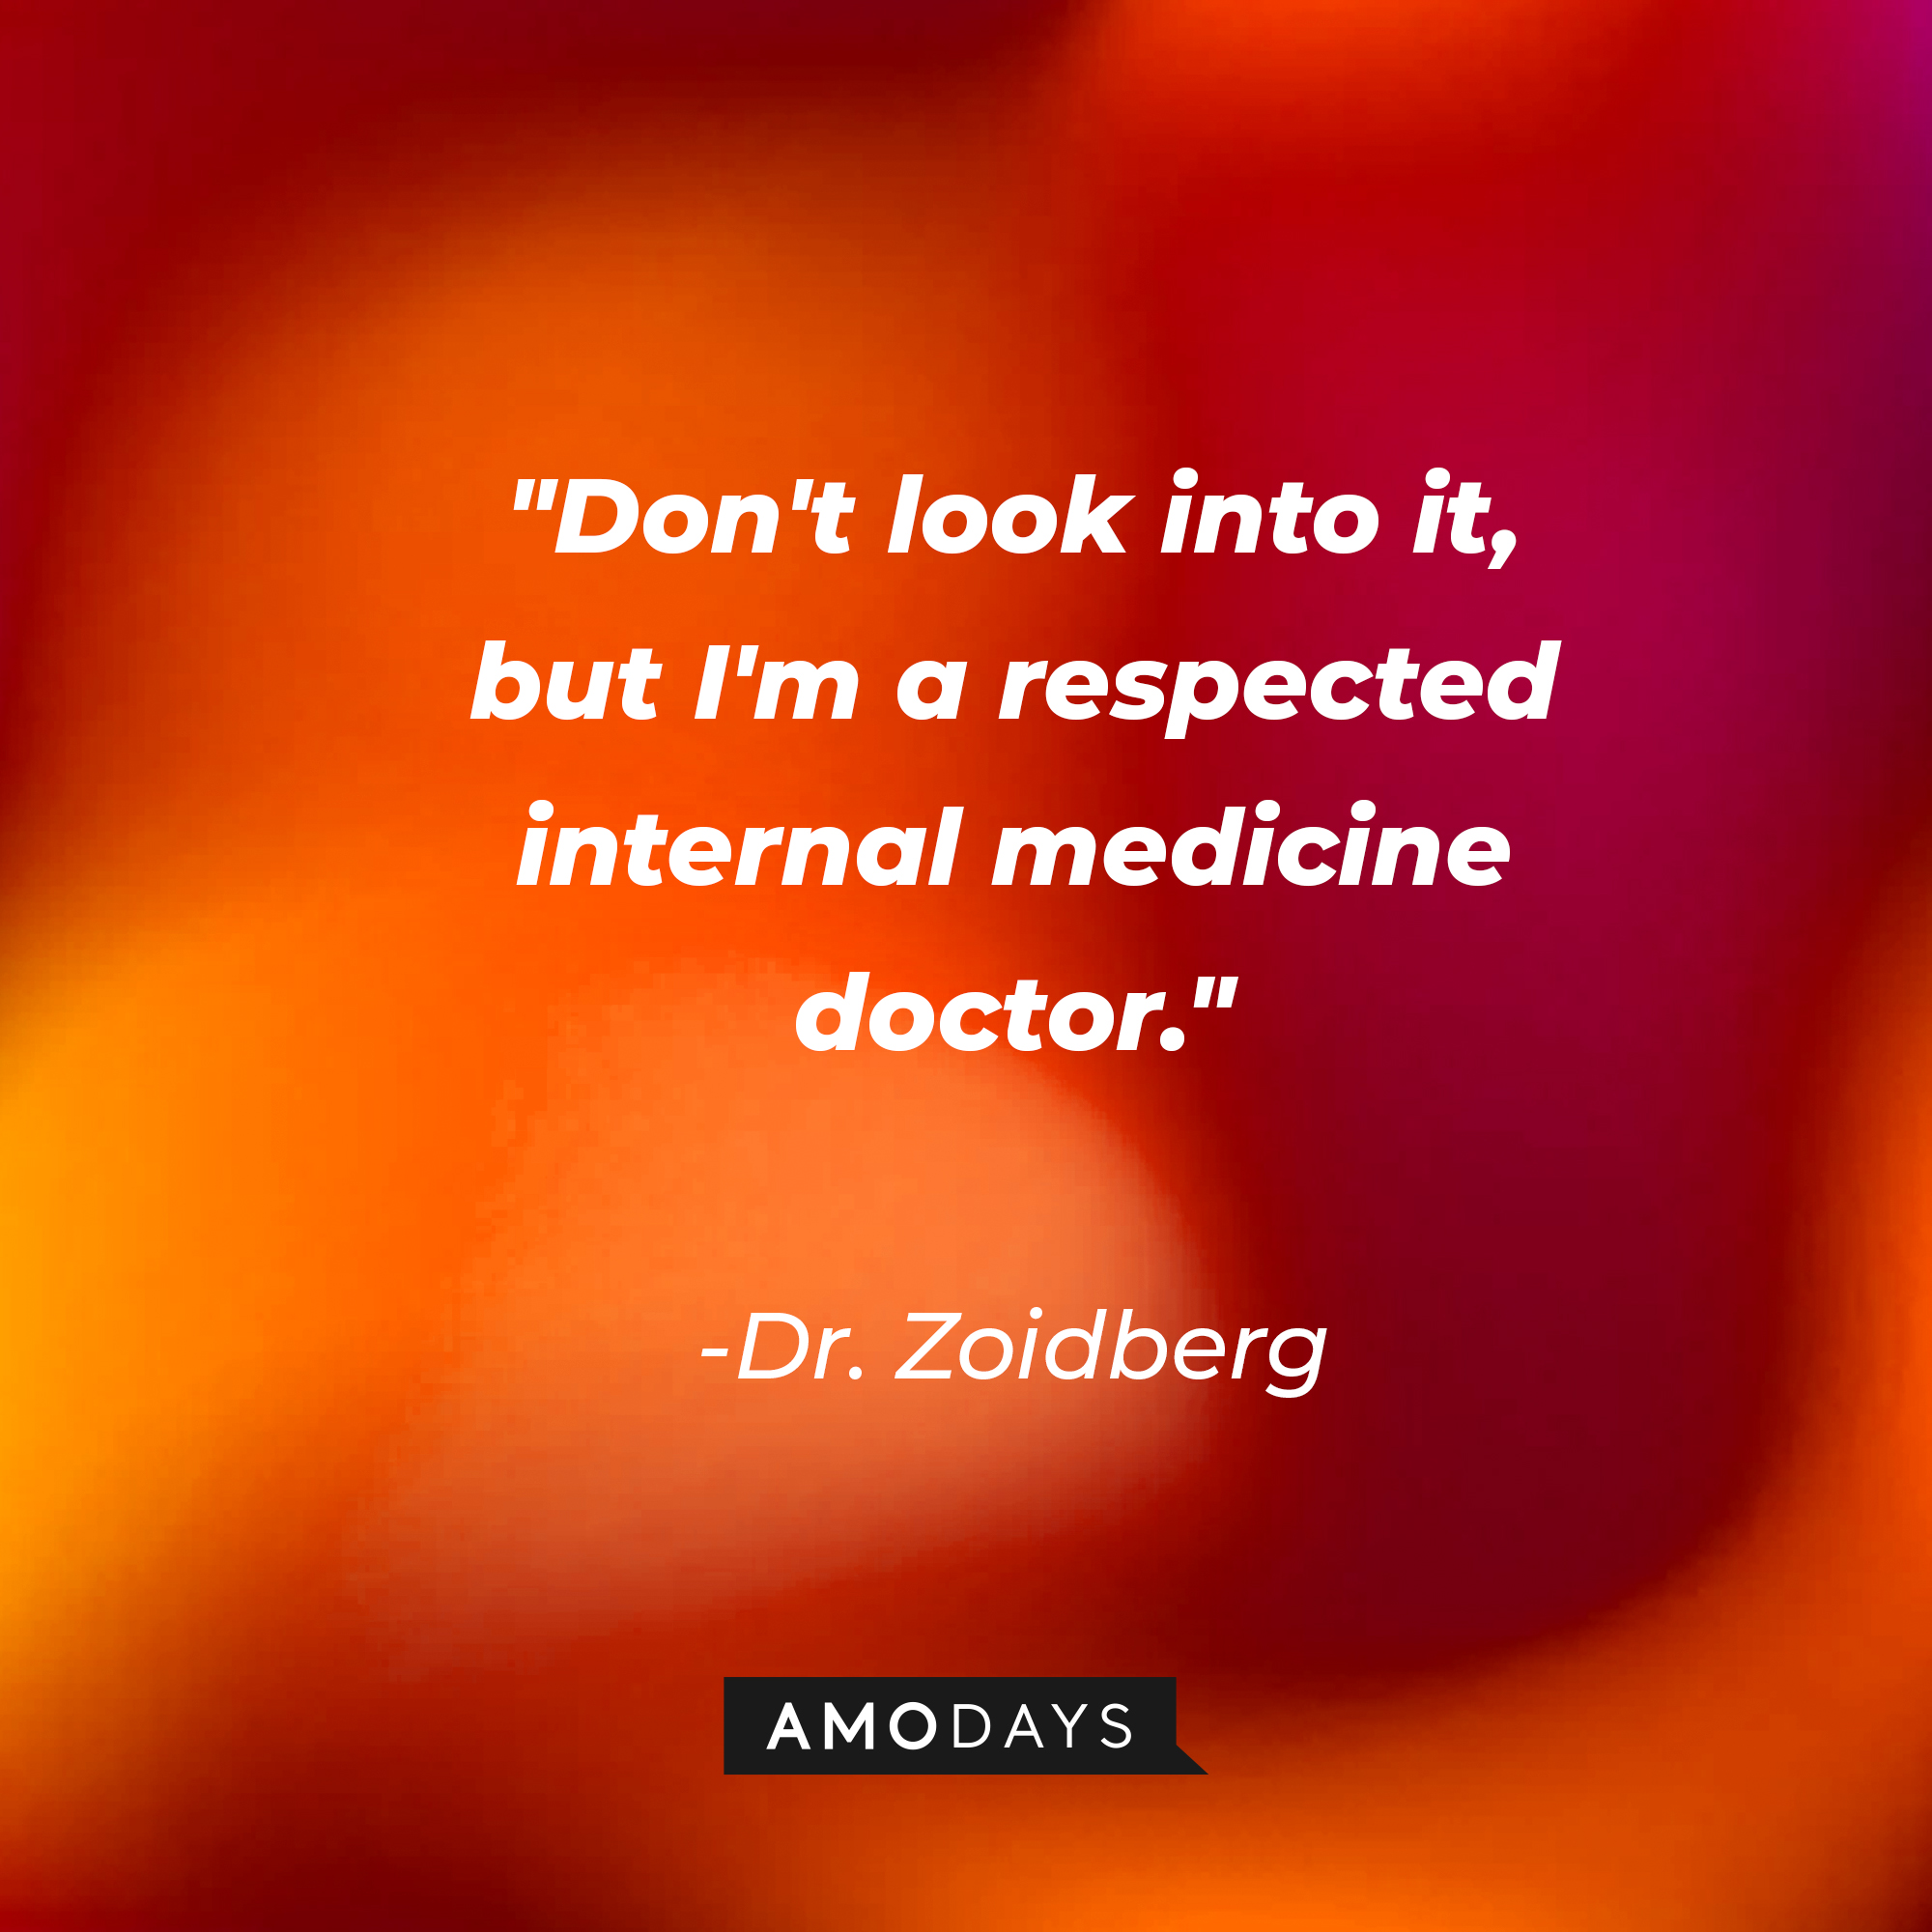 Dr. Zoidberg's quote: "Don't look into it, but I'm a respected internal medicine doctor." | Source: AmoDays